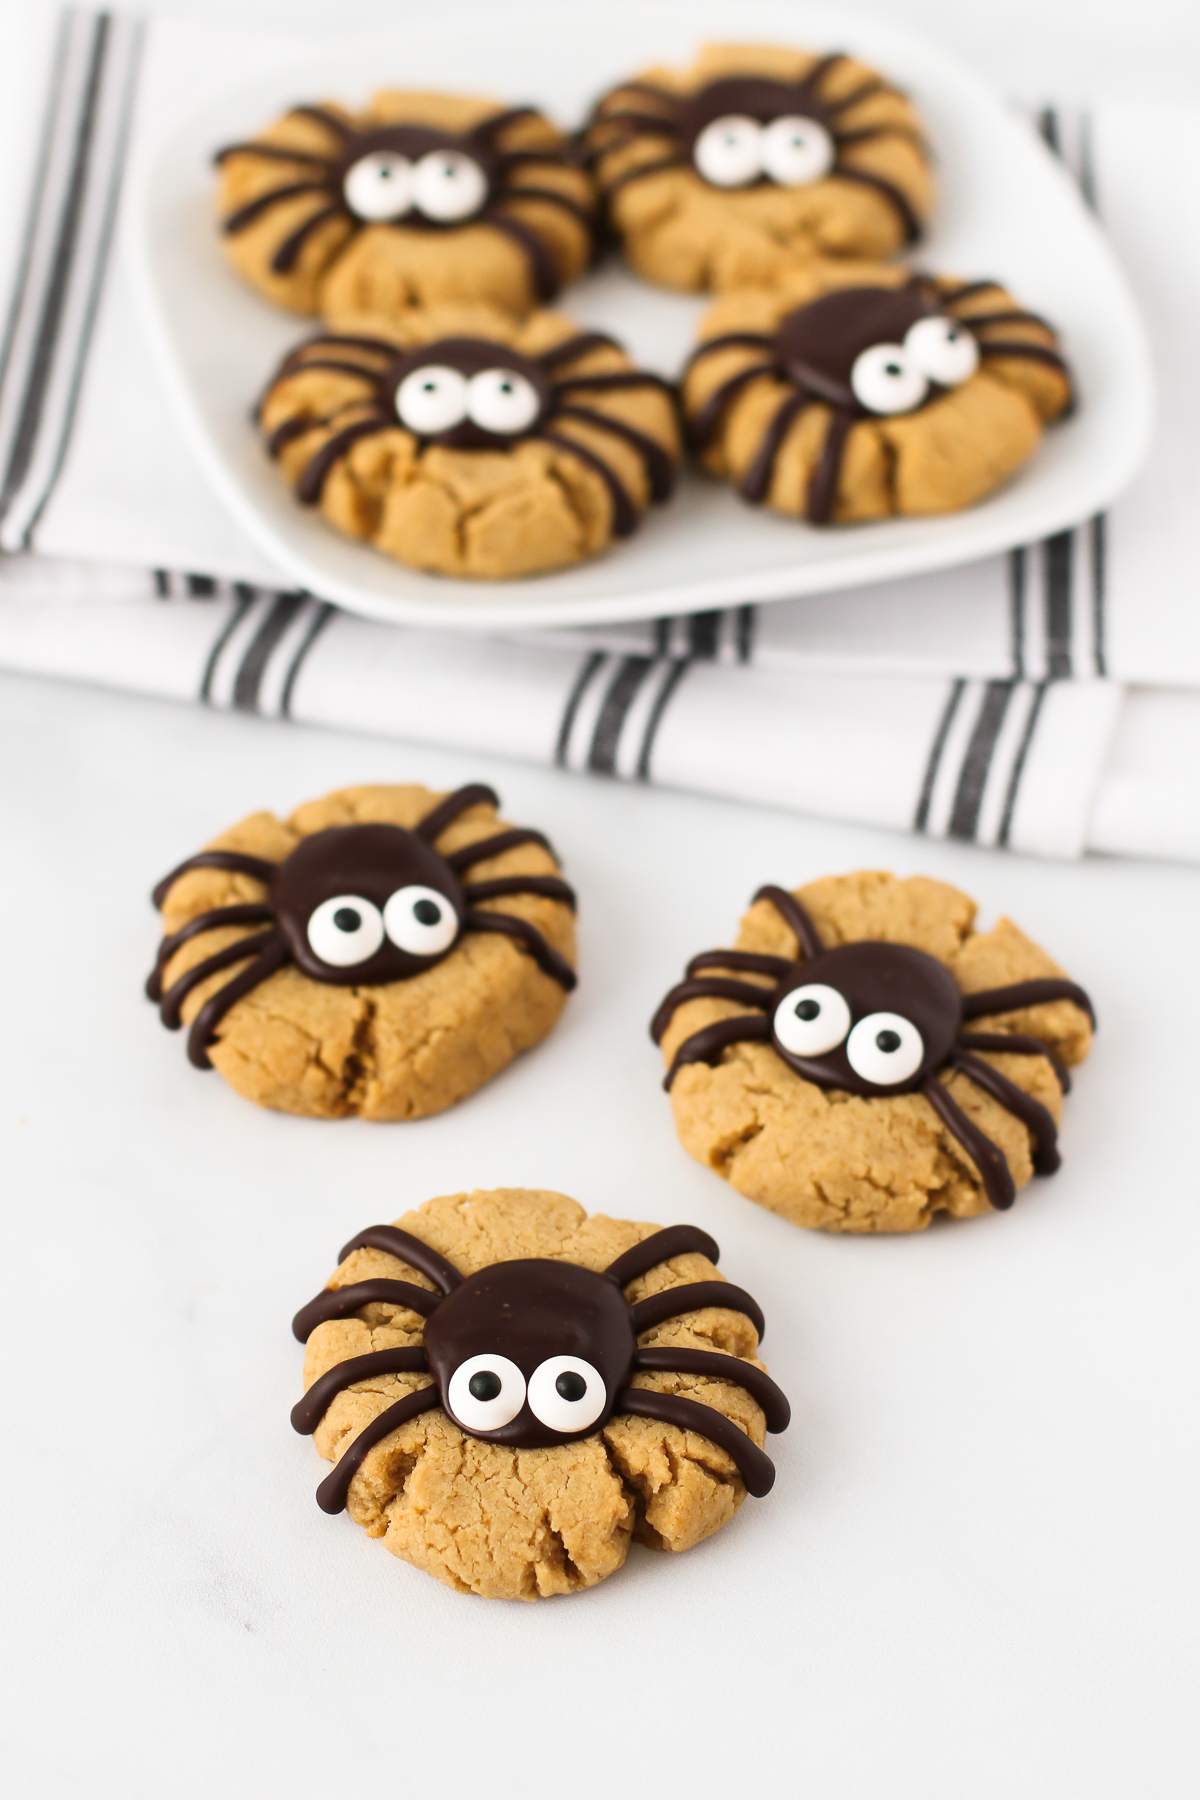 Gluten Free Vegan Peanut Butter Spider Cookies. How cute are these peanut butter thumbprint cookies, topped with a delicious chocolate spider?